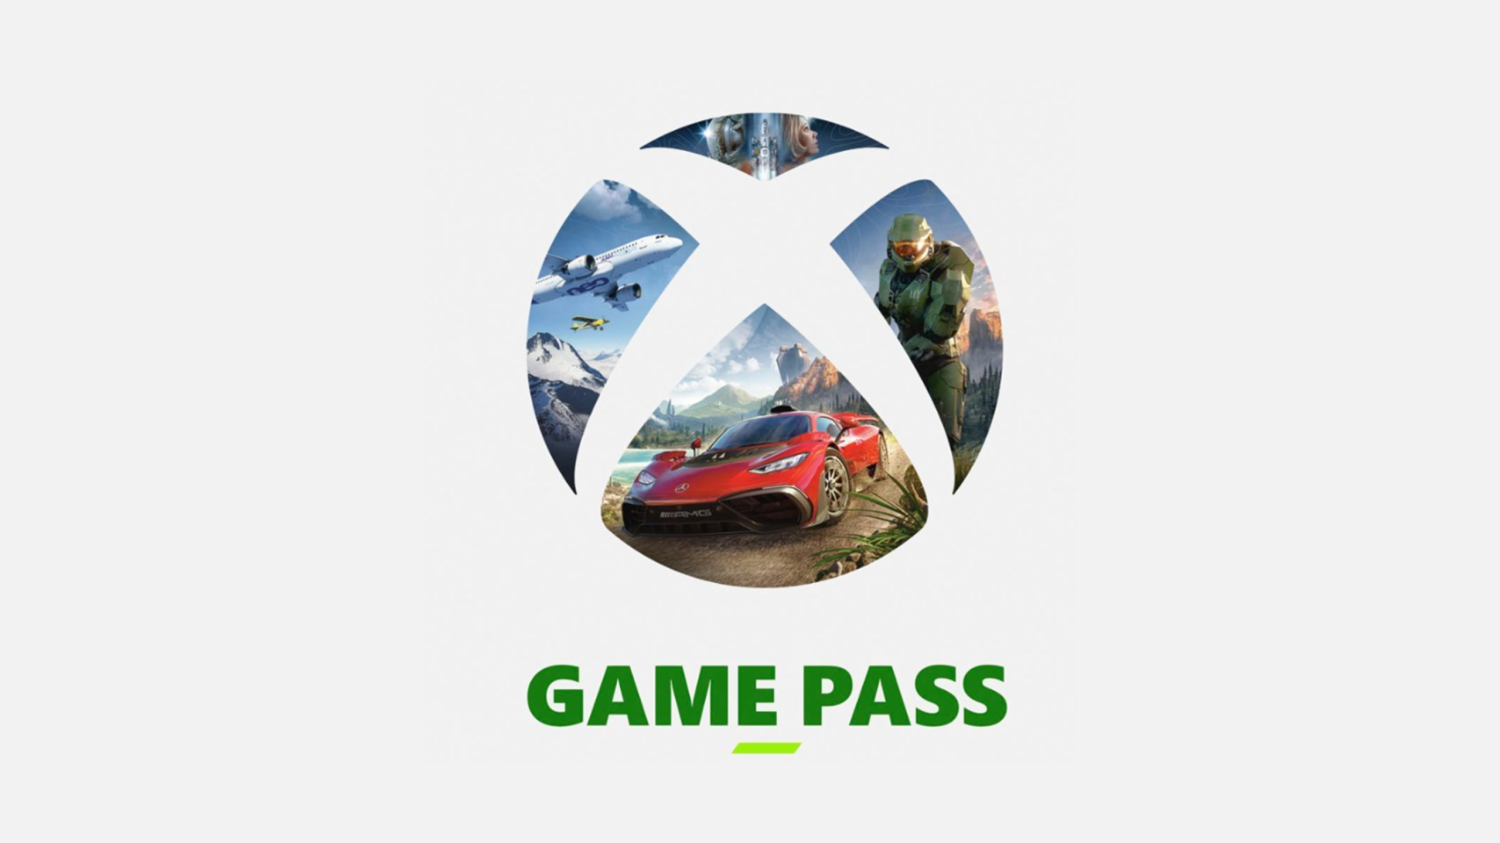 Xbox Game Pass Core: All 19 confirmed games included in cheap Game Pass  tier